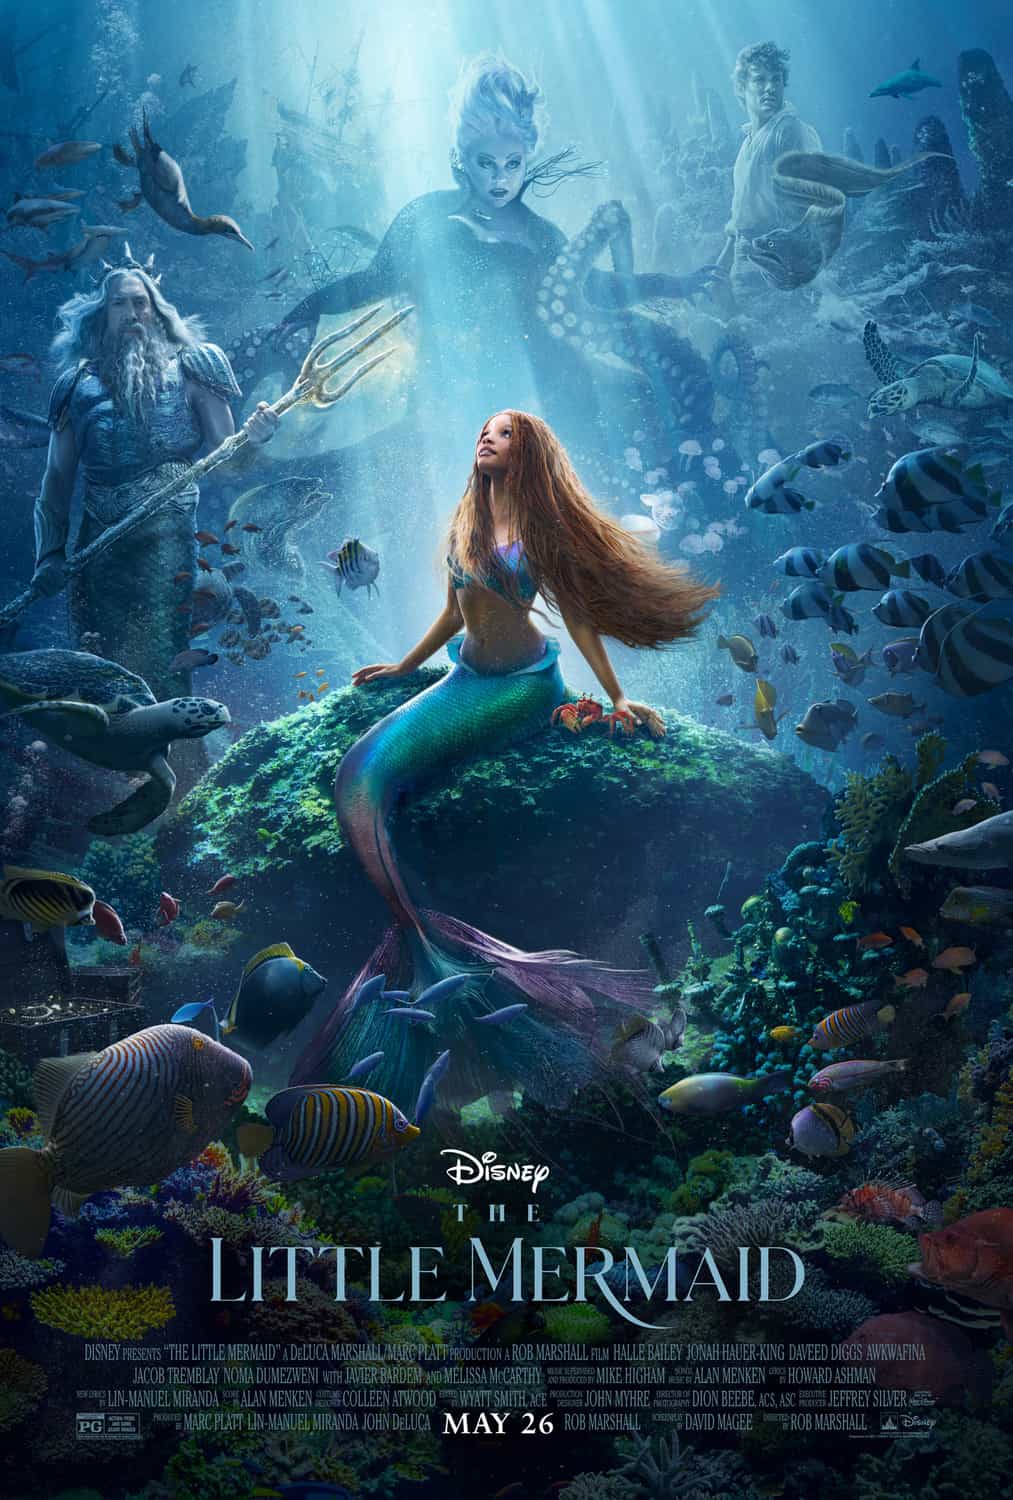 The Little Mermaid (live action remake) is given a PG age rating in the UK for mild threat